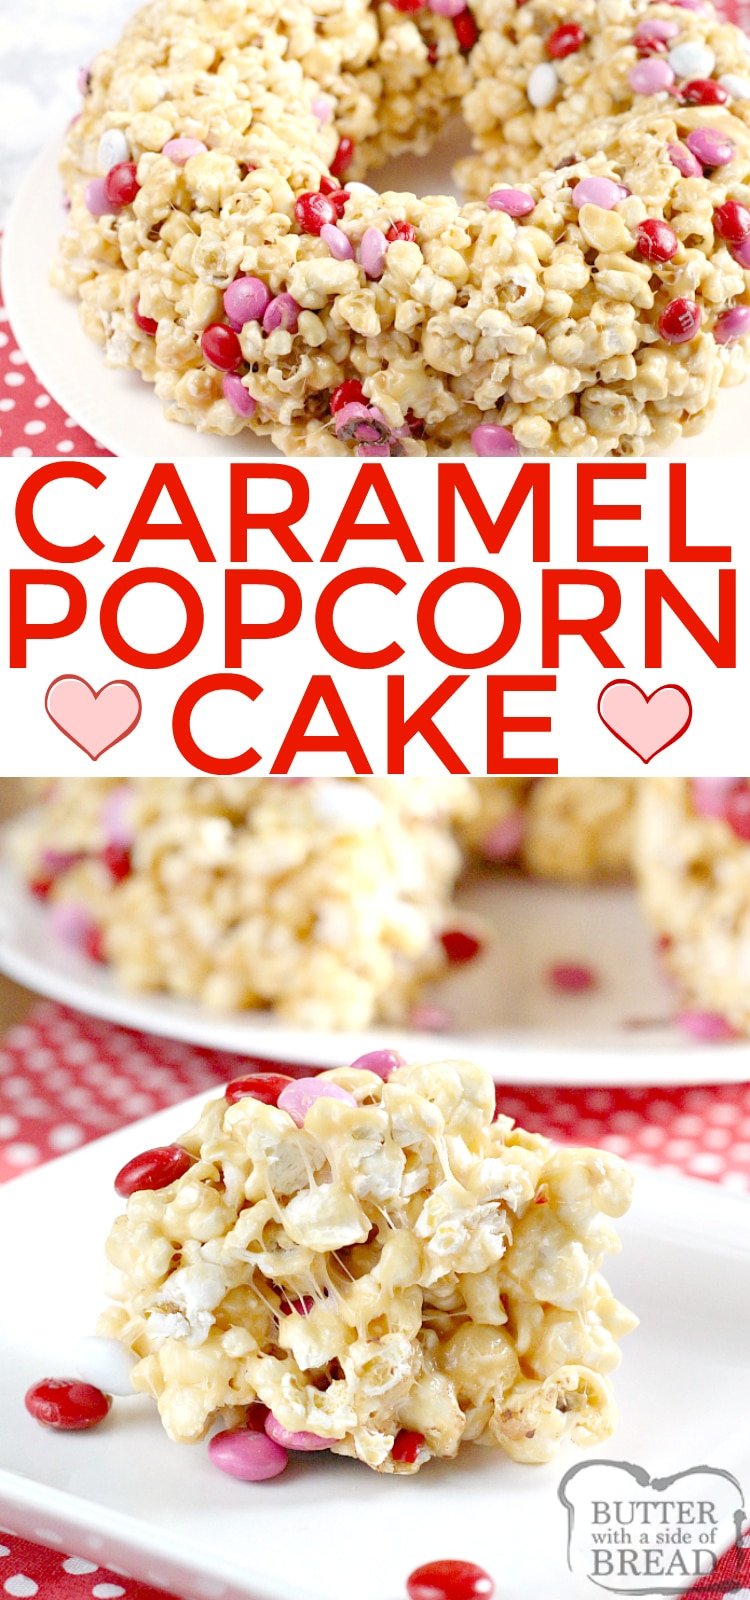 Caramel Popcorn Cake is made with caramel, marshmallows and a few other basic ingredients for a quick and easy no-bake dessert.